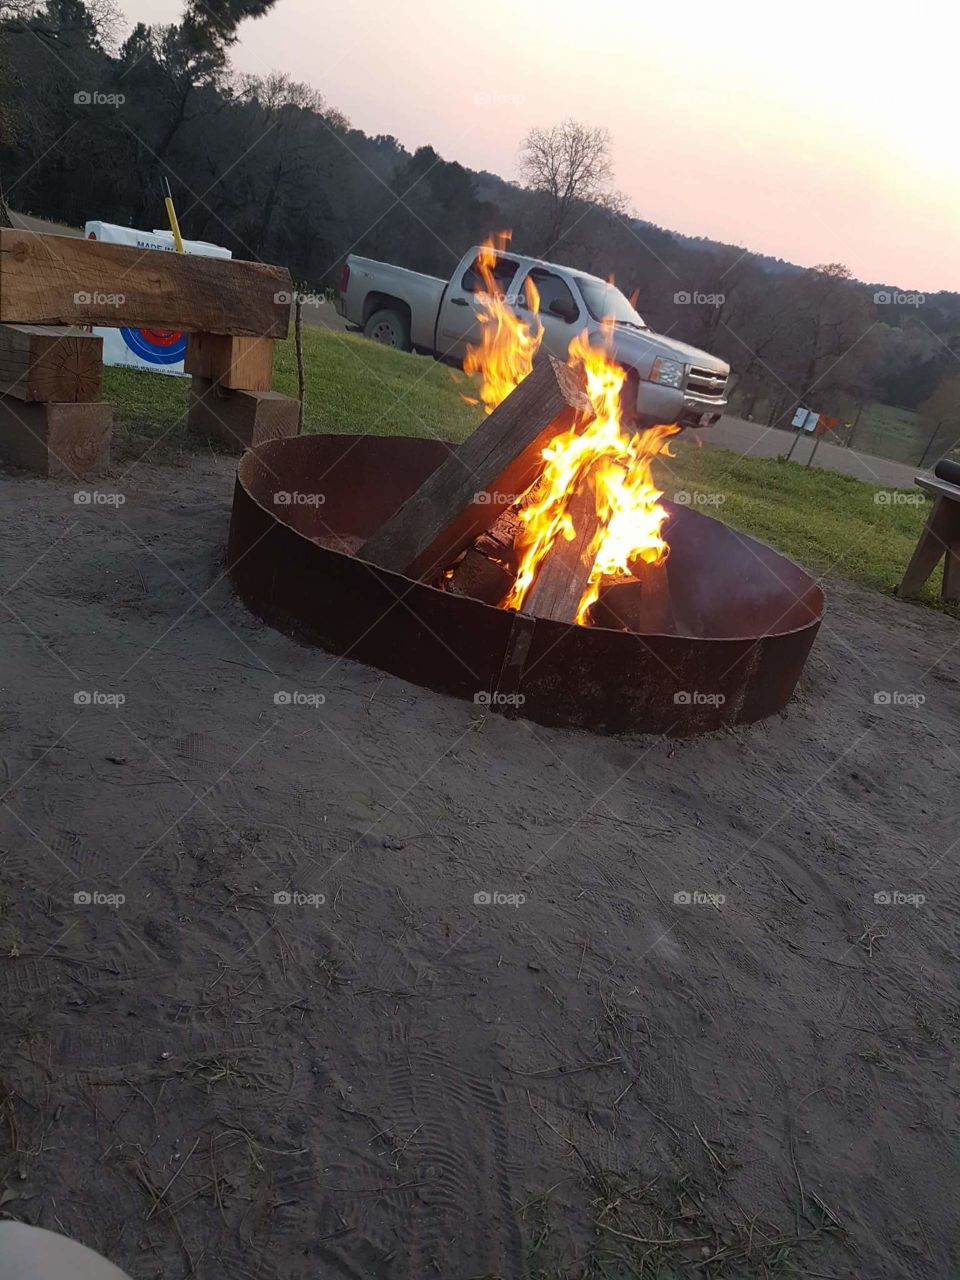 chill by the fire pit